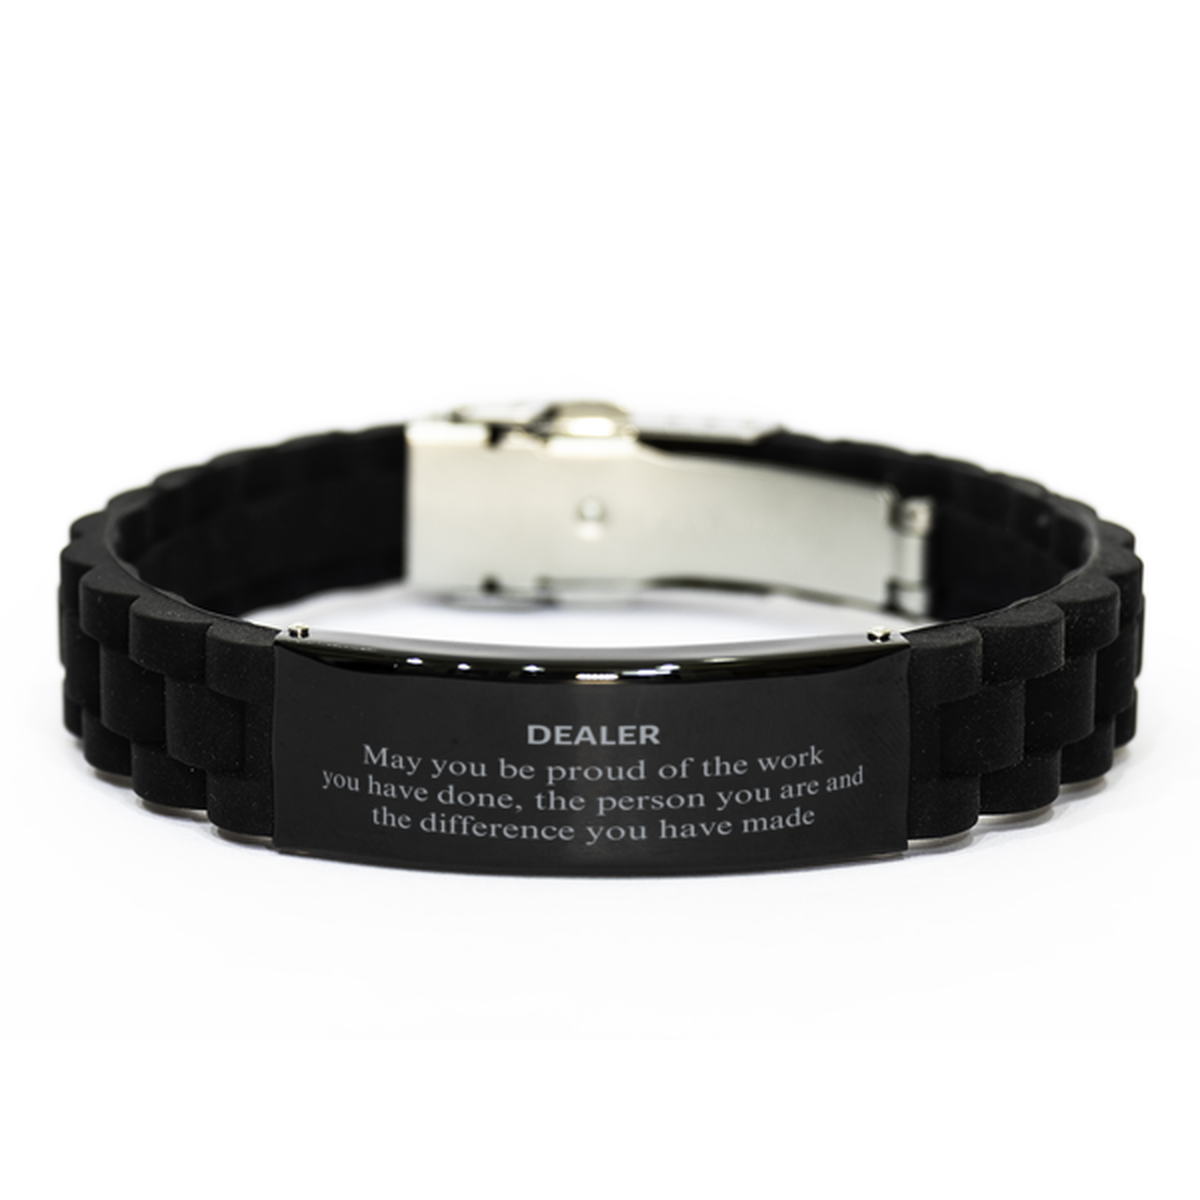 Dealer May you be proud of the work you have done, Retirement Dealer Black Glidelock Clasp Bracelet for Colleague Appreciation Gifts Amazing for Dealer